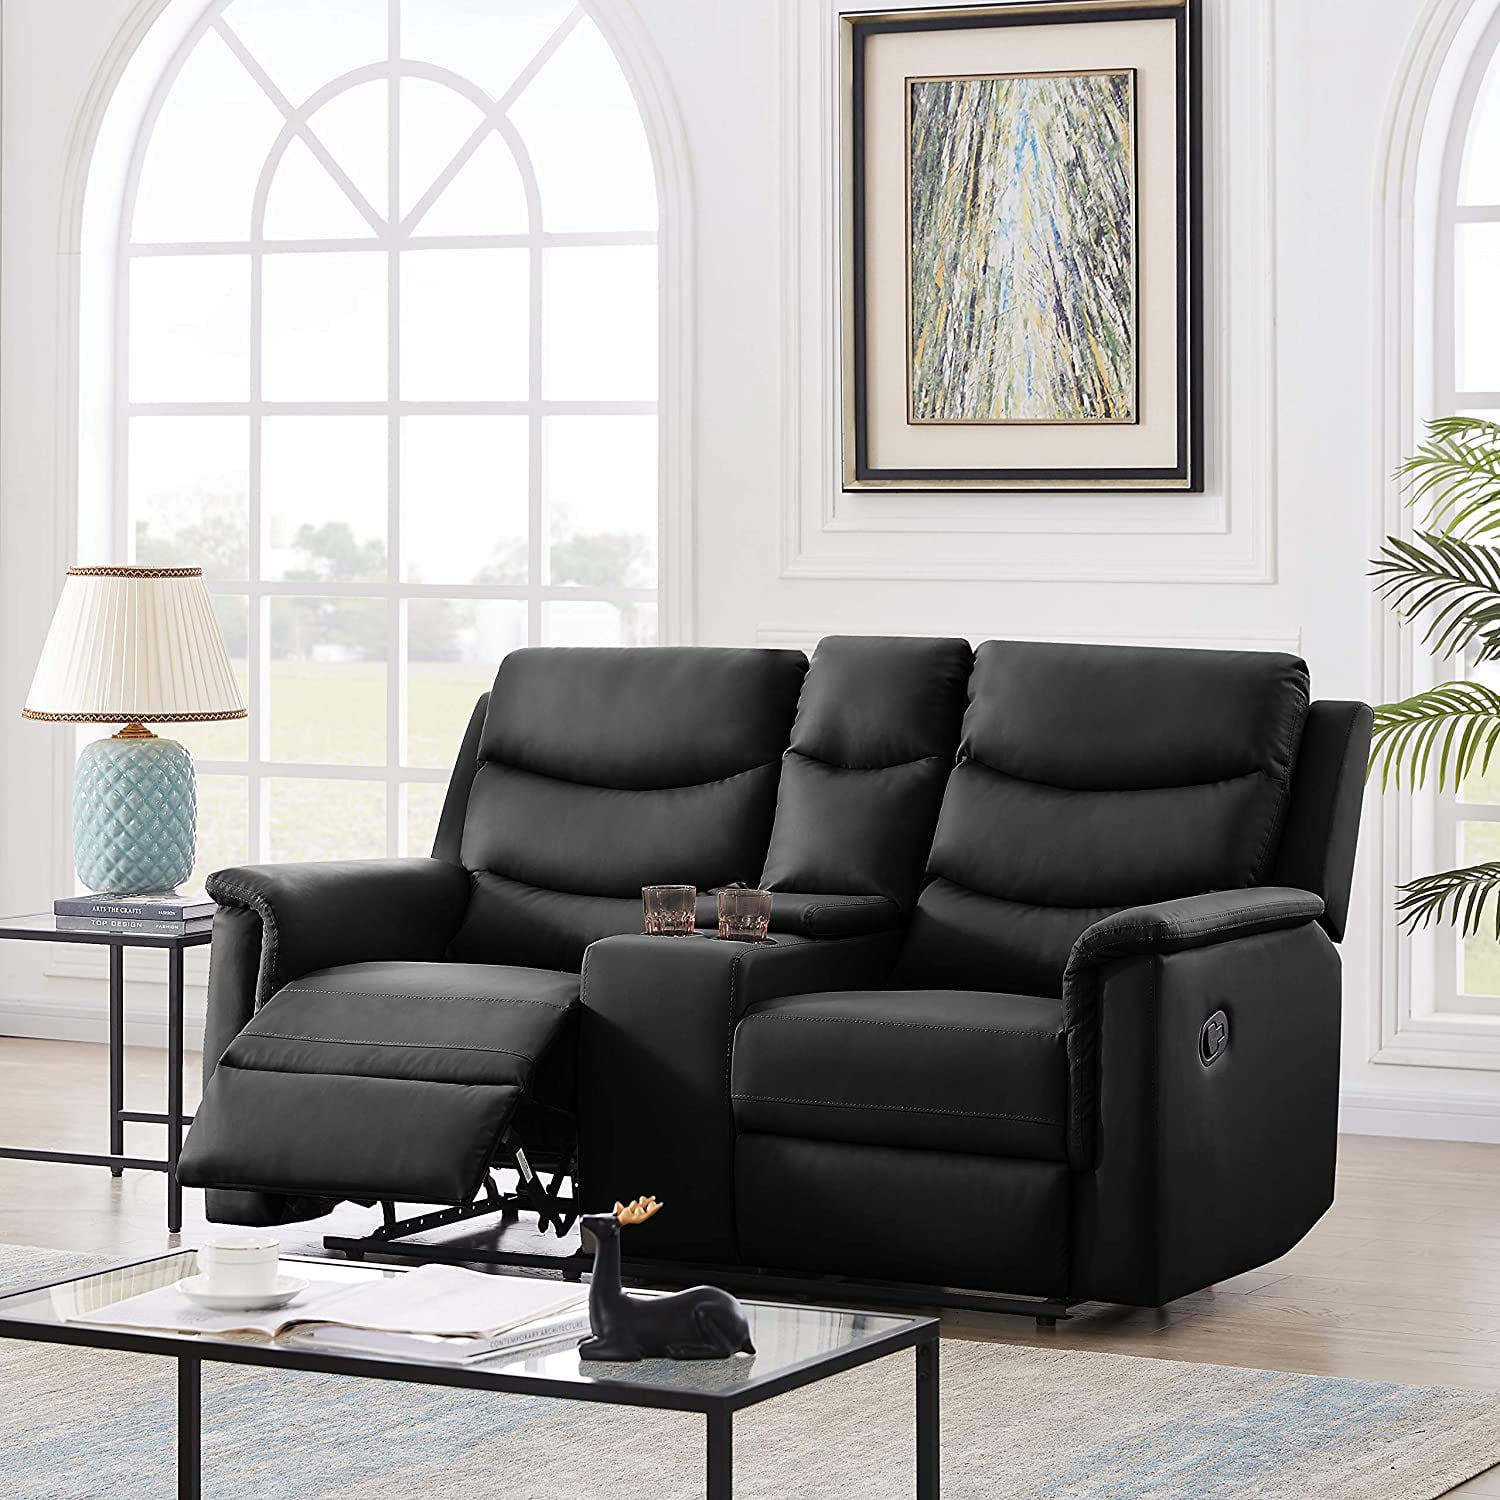 Sofa Pu Leather Recliner Loveseat With